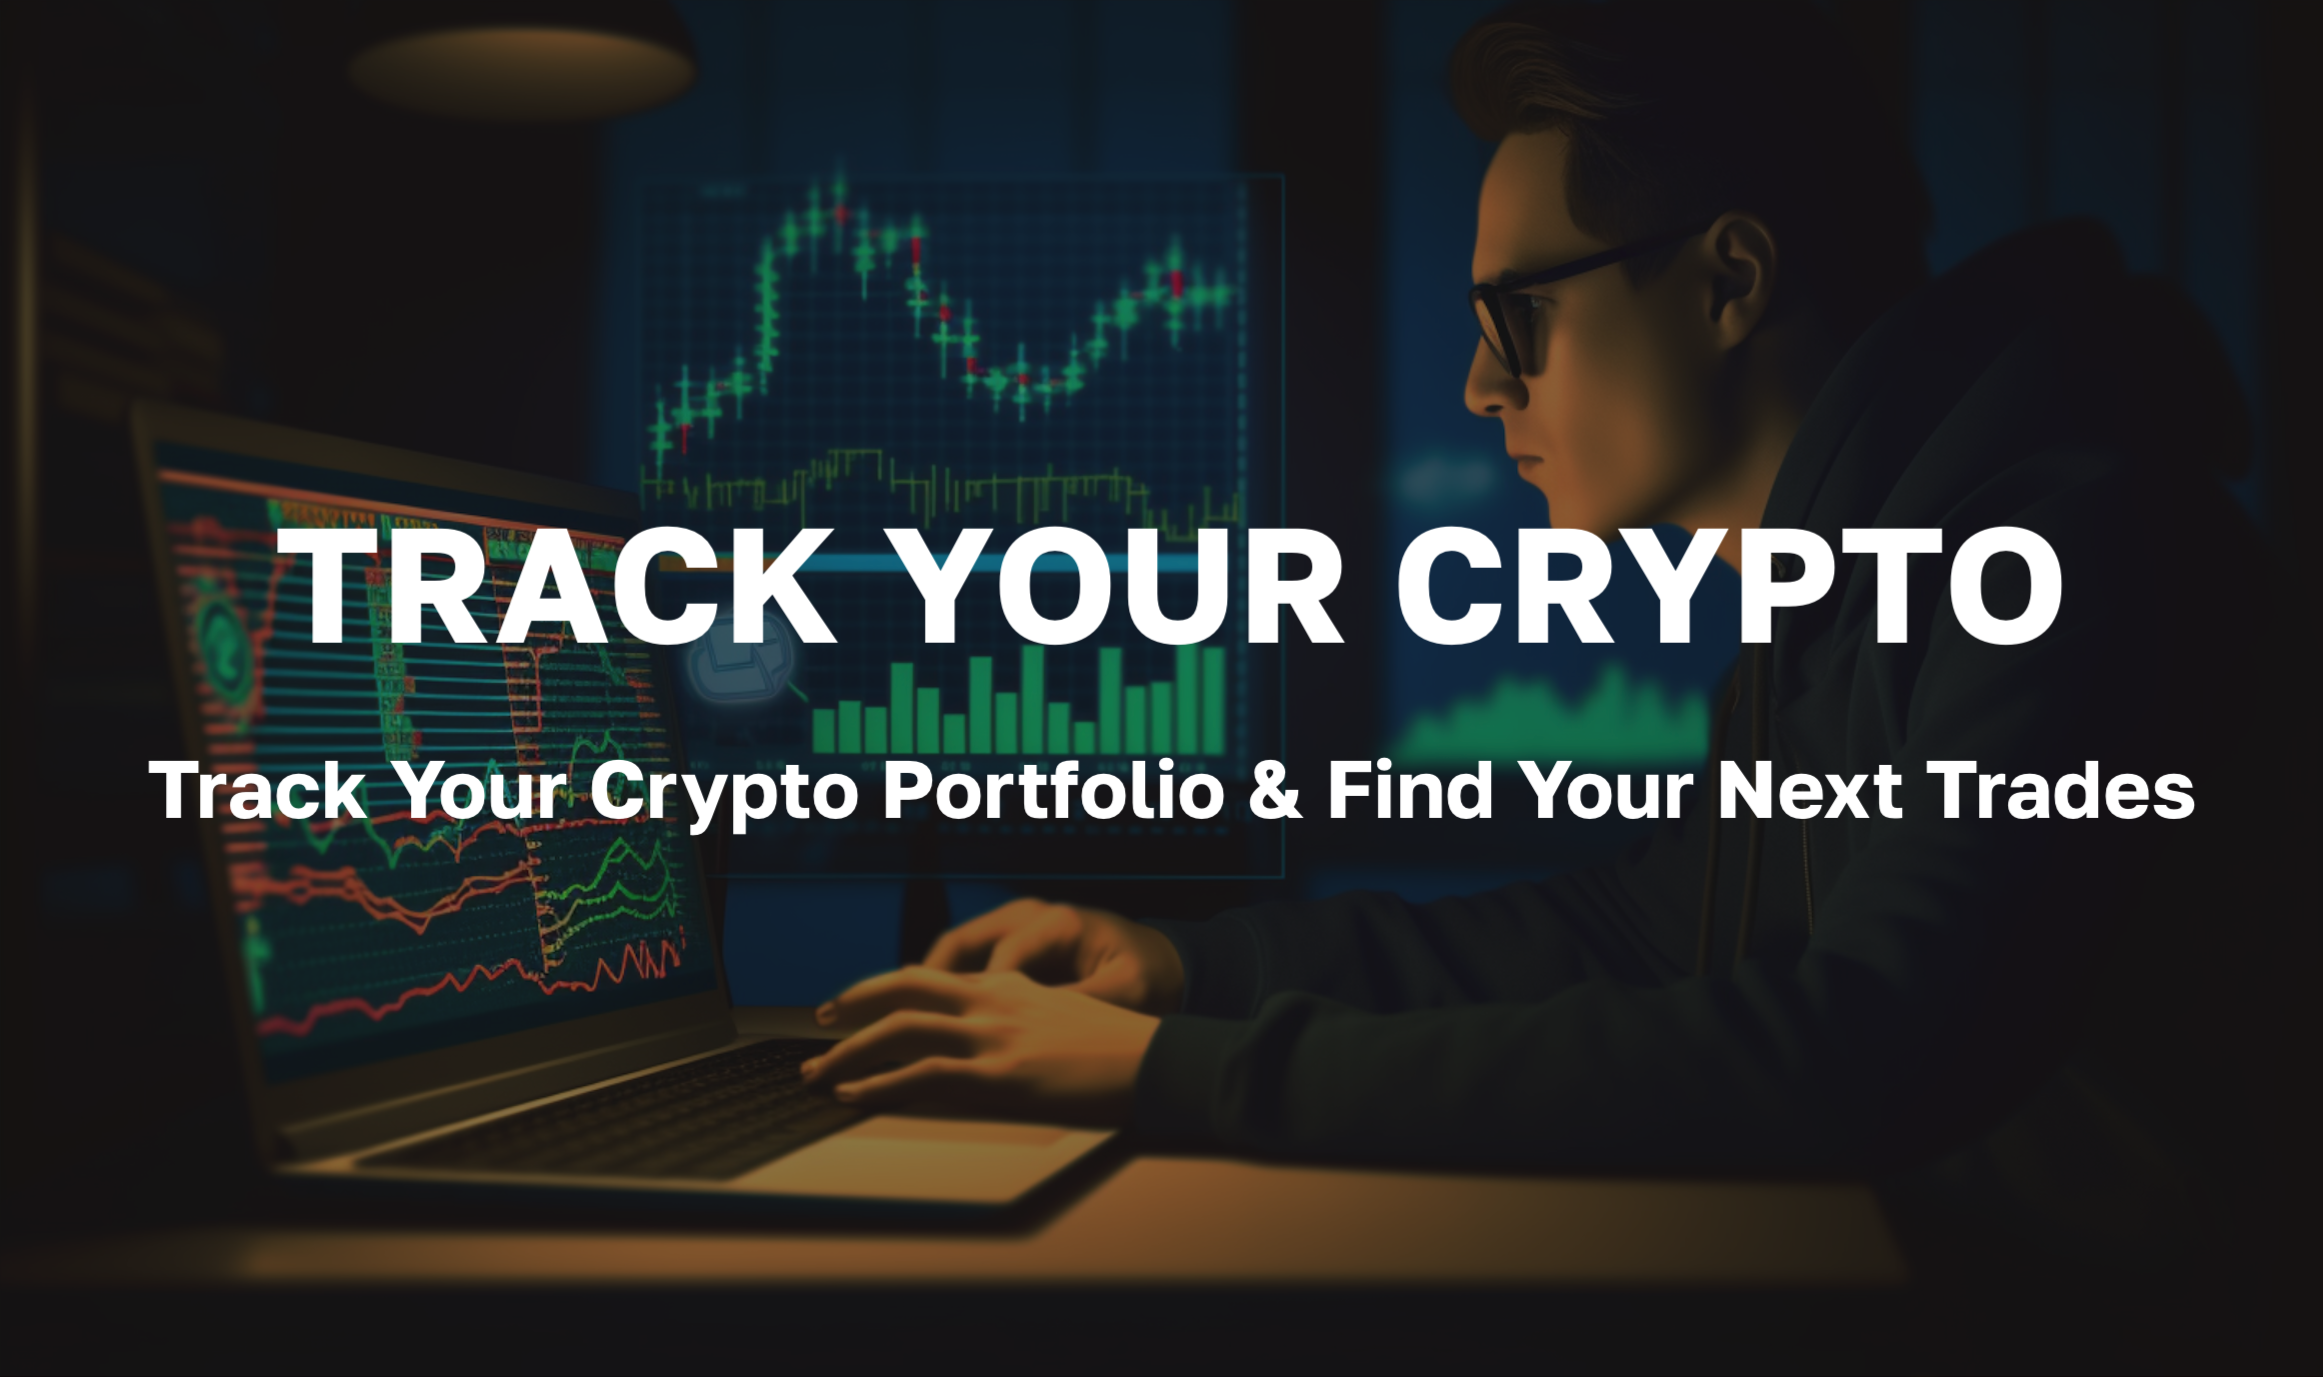 How to Track Your Crypto Portfolio and Find Your Next Crypto Trades